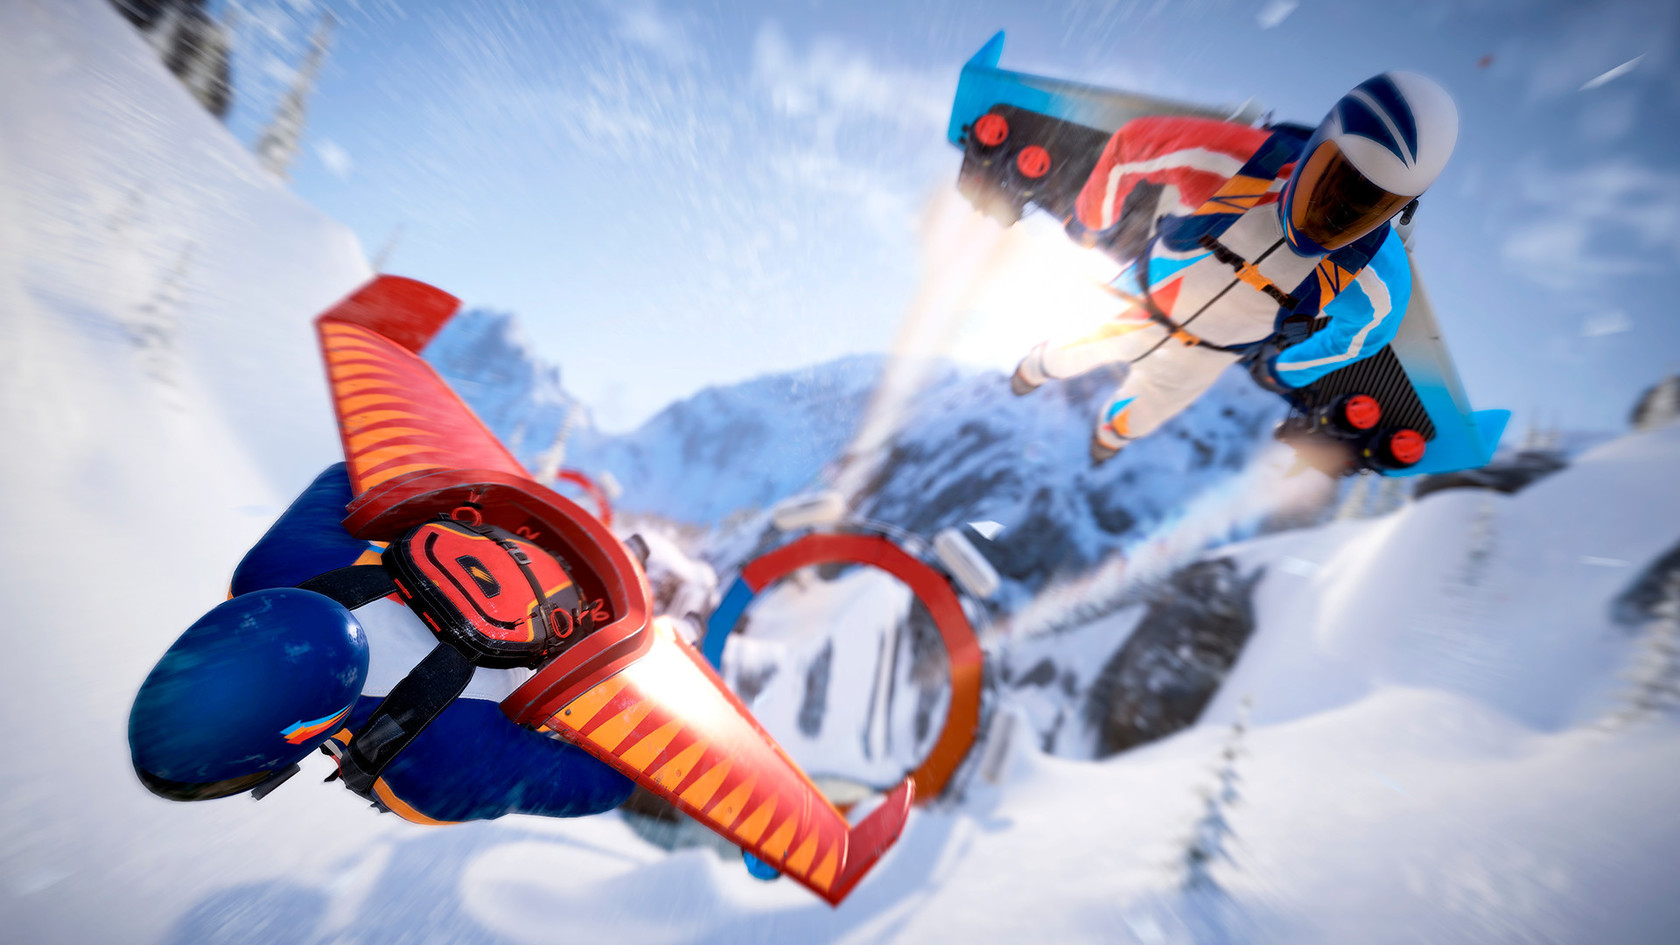 Steep X Games Gold Edition  Download and Buy Today - Epic Games Store